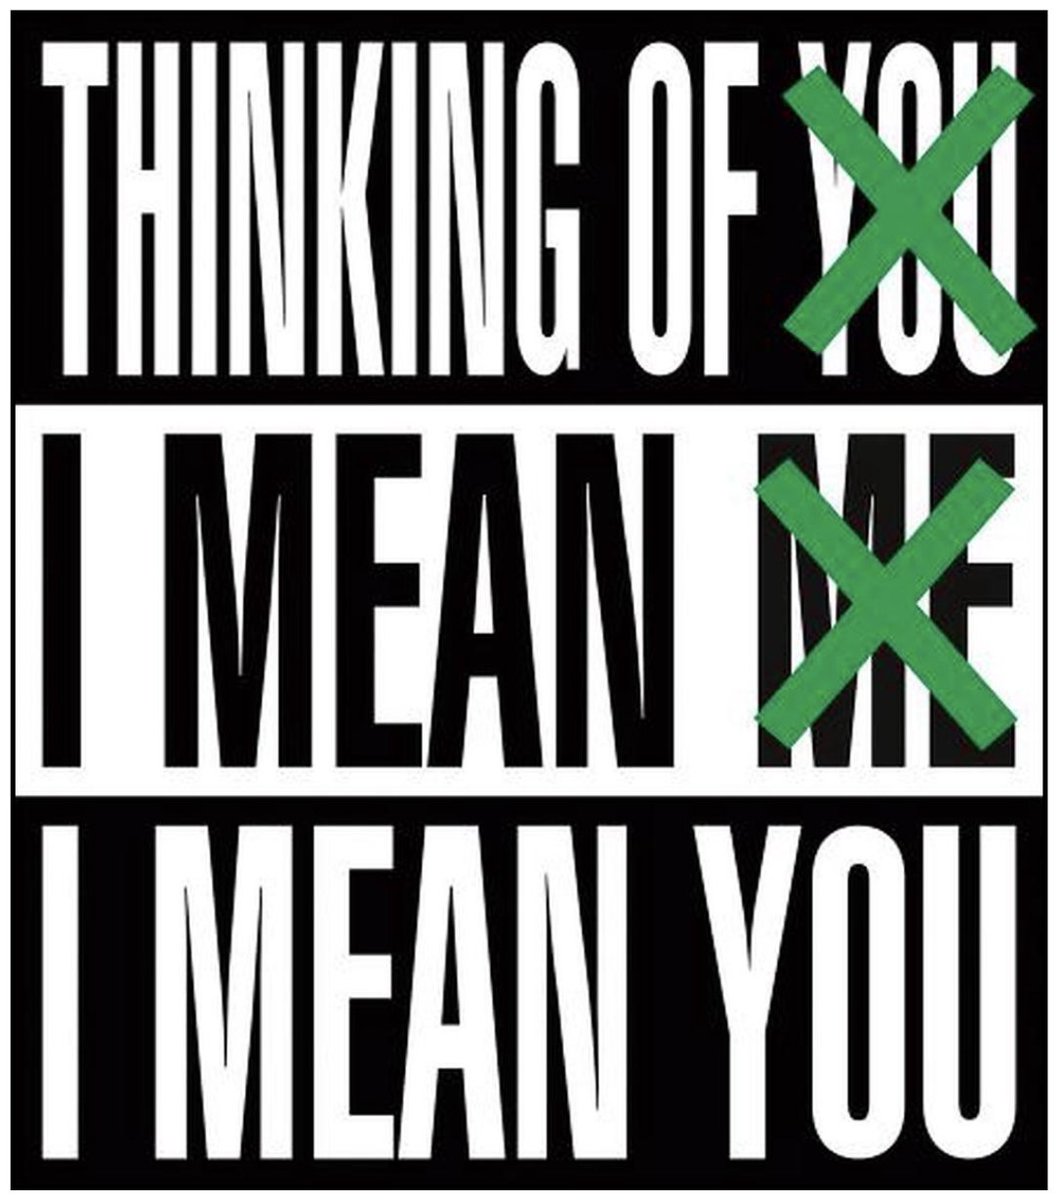 Barbara Kruger – Thinking of You. I Mean Me. I Mean You